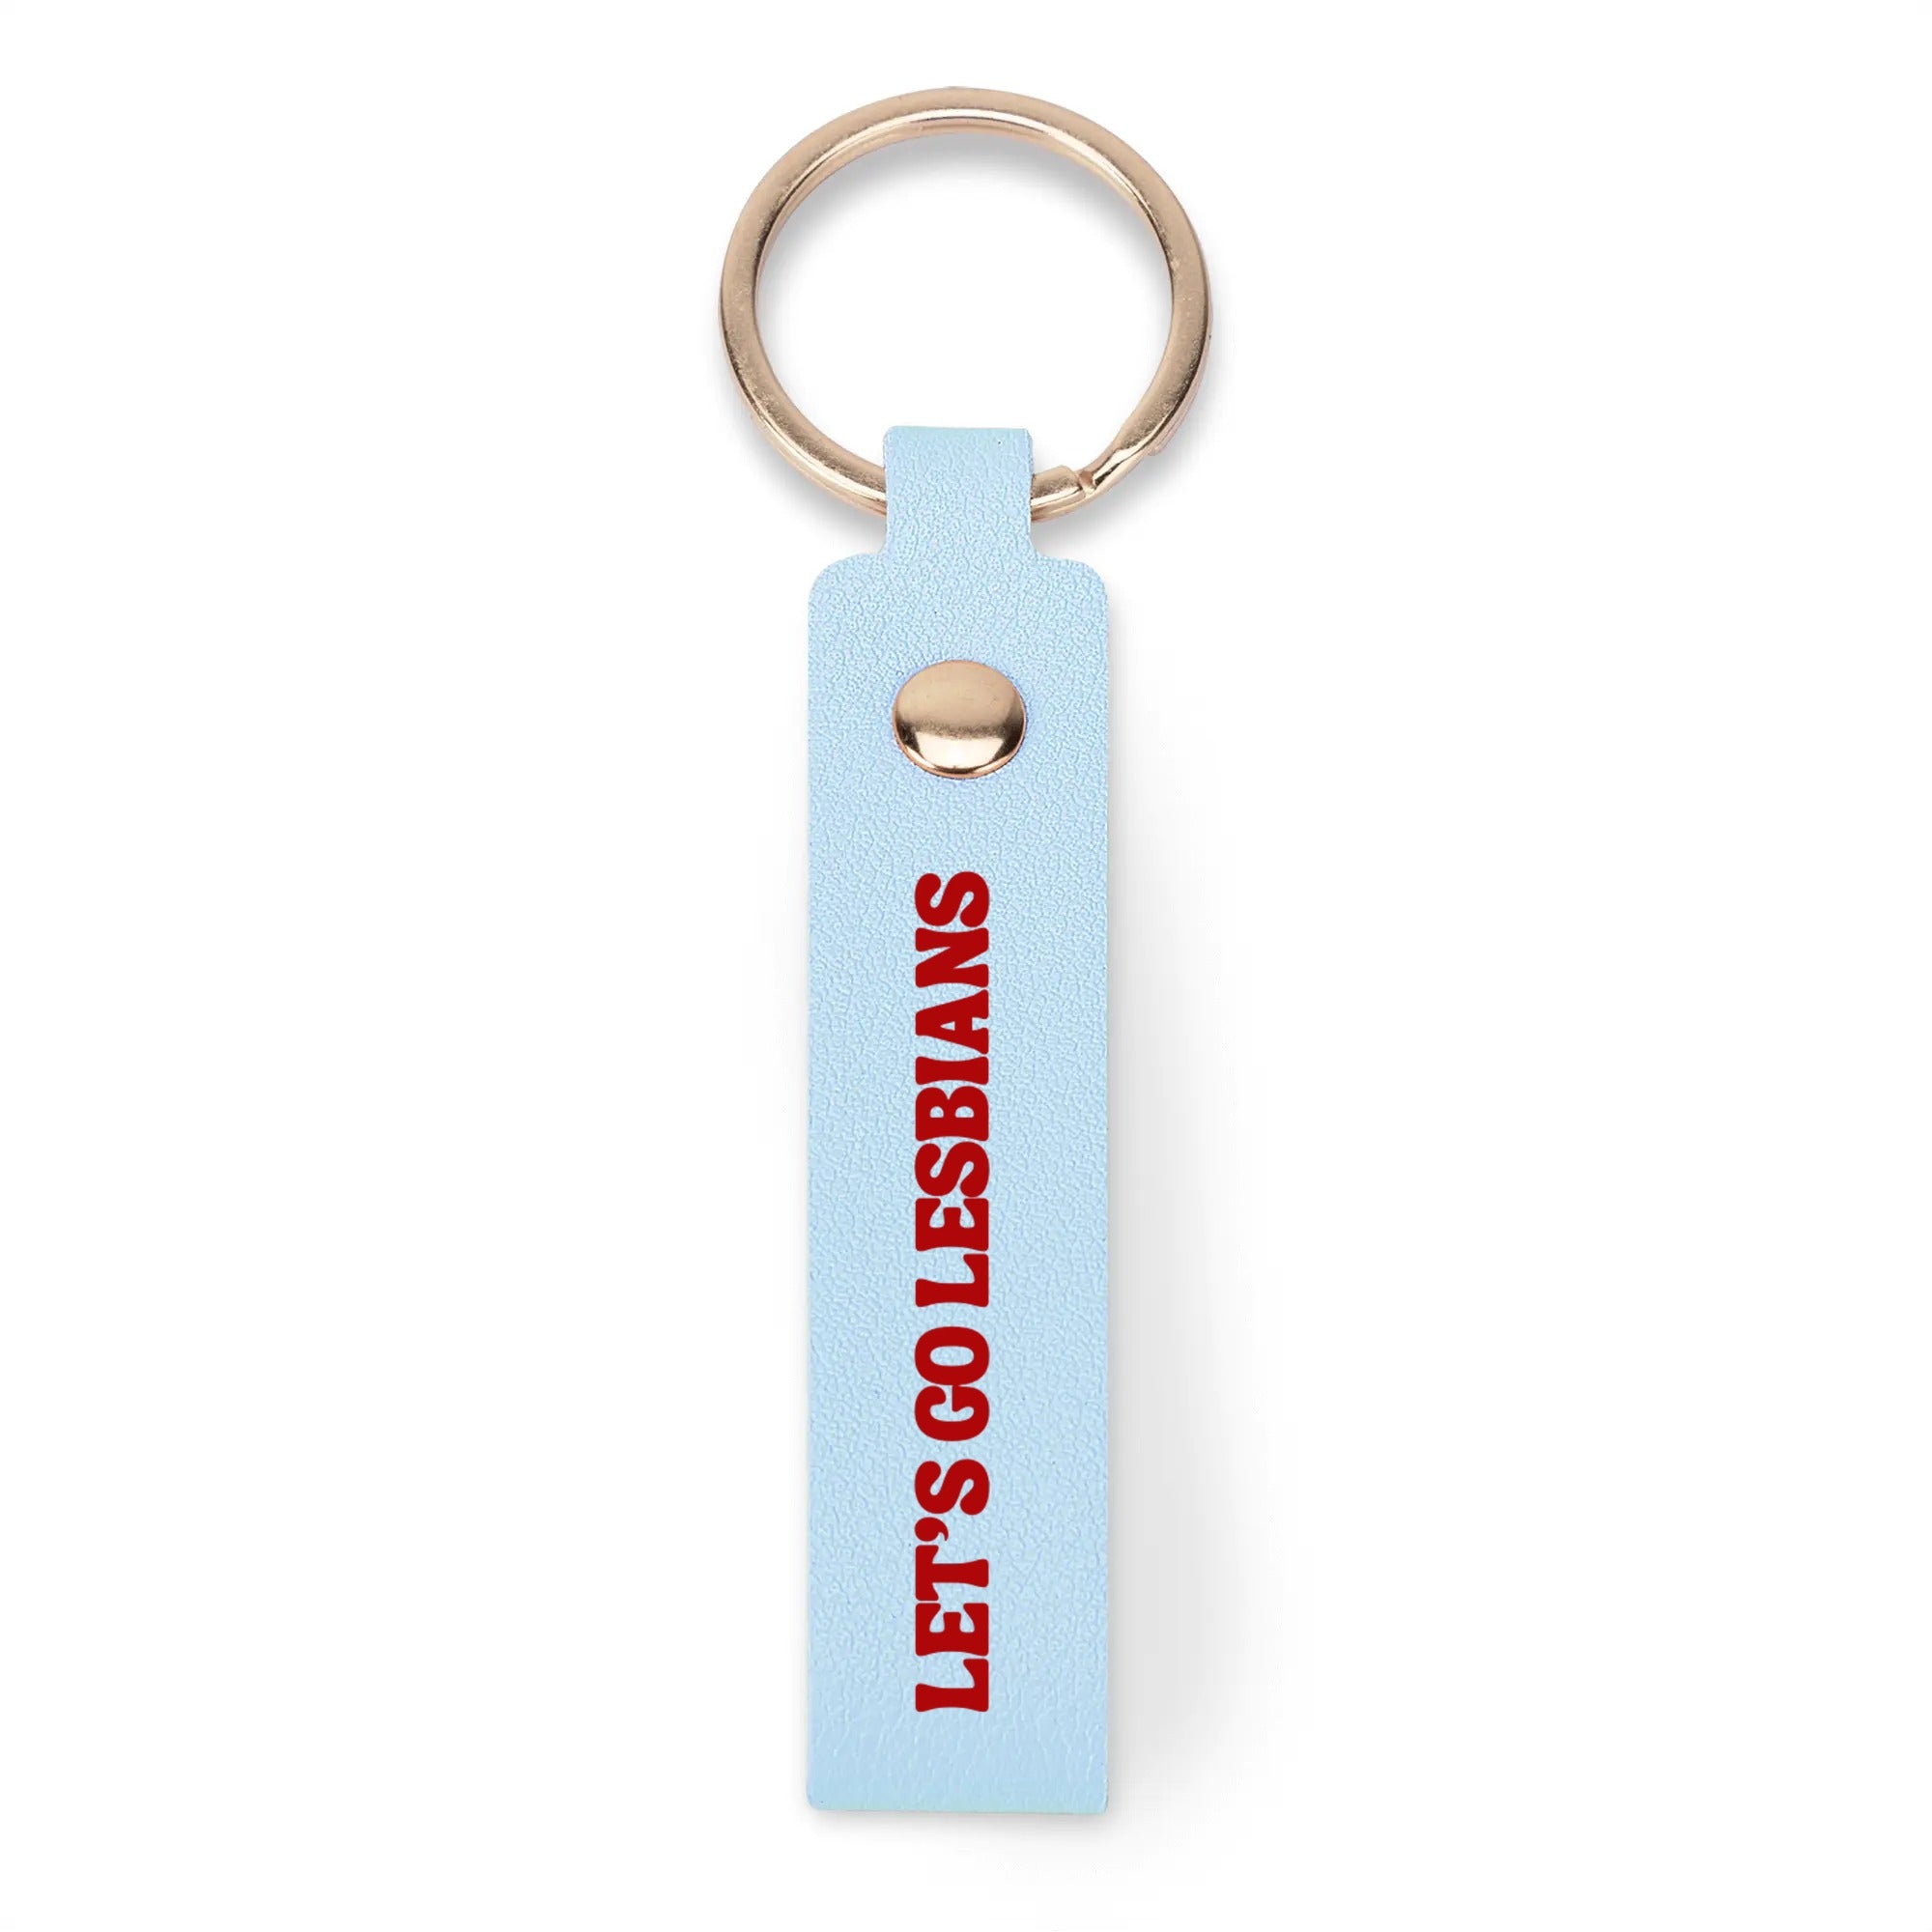 Let's Go Lesbians Handcrafted Leather Loop Keychain - Rose Gold Co. Shop